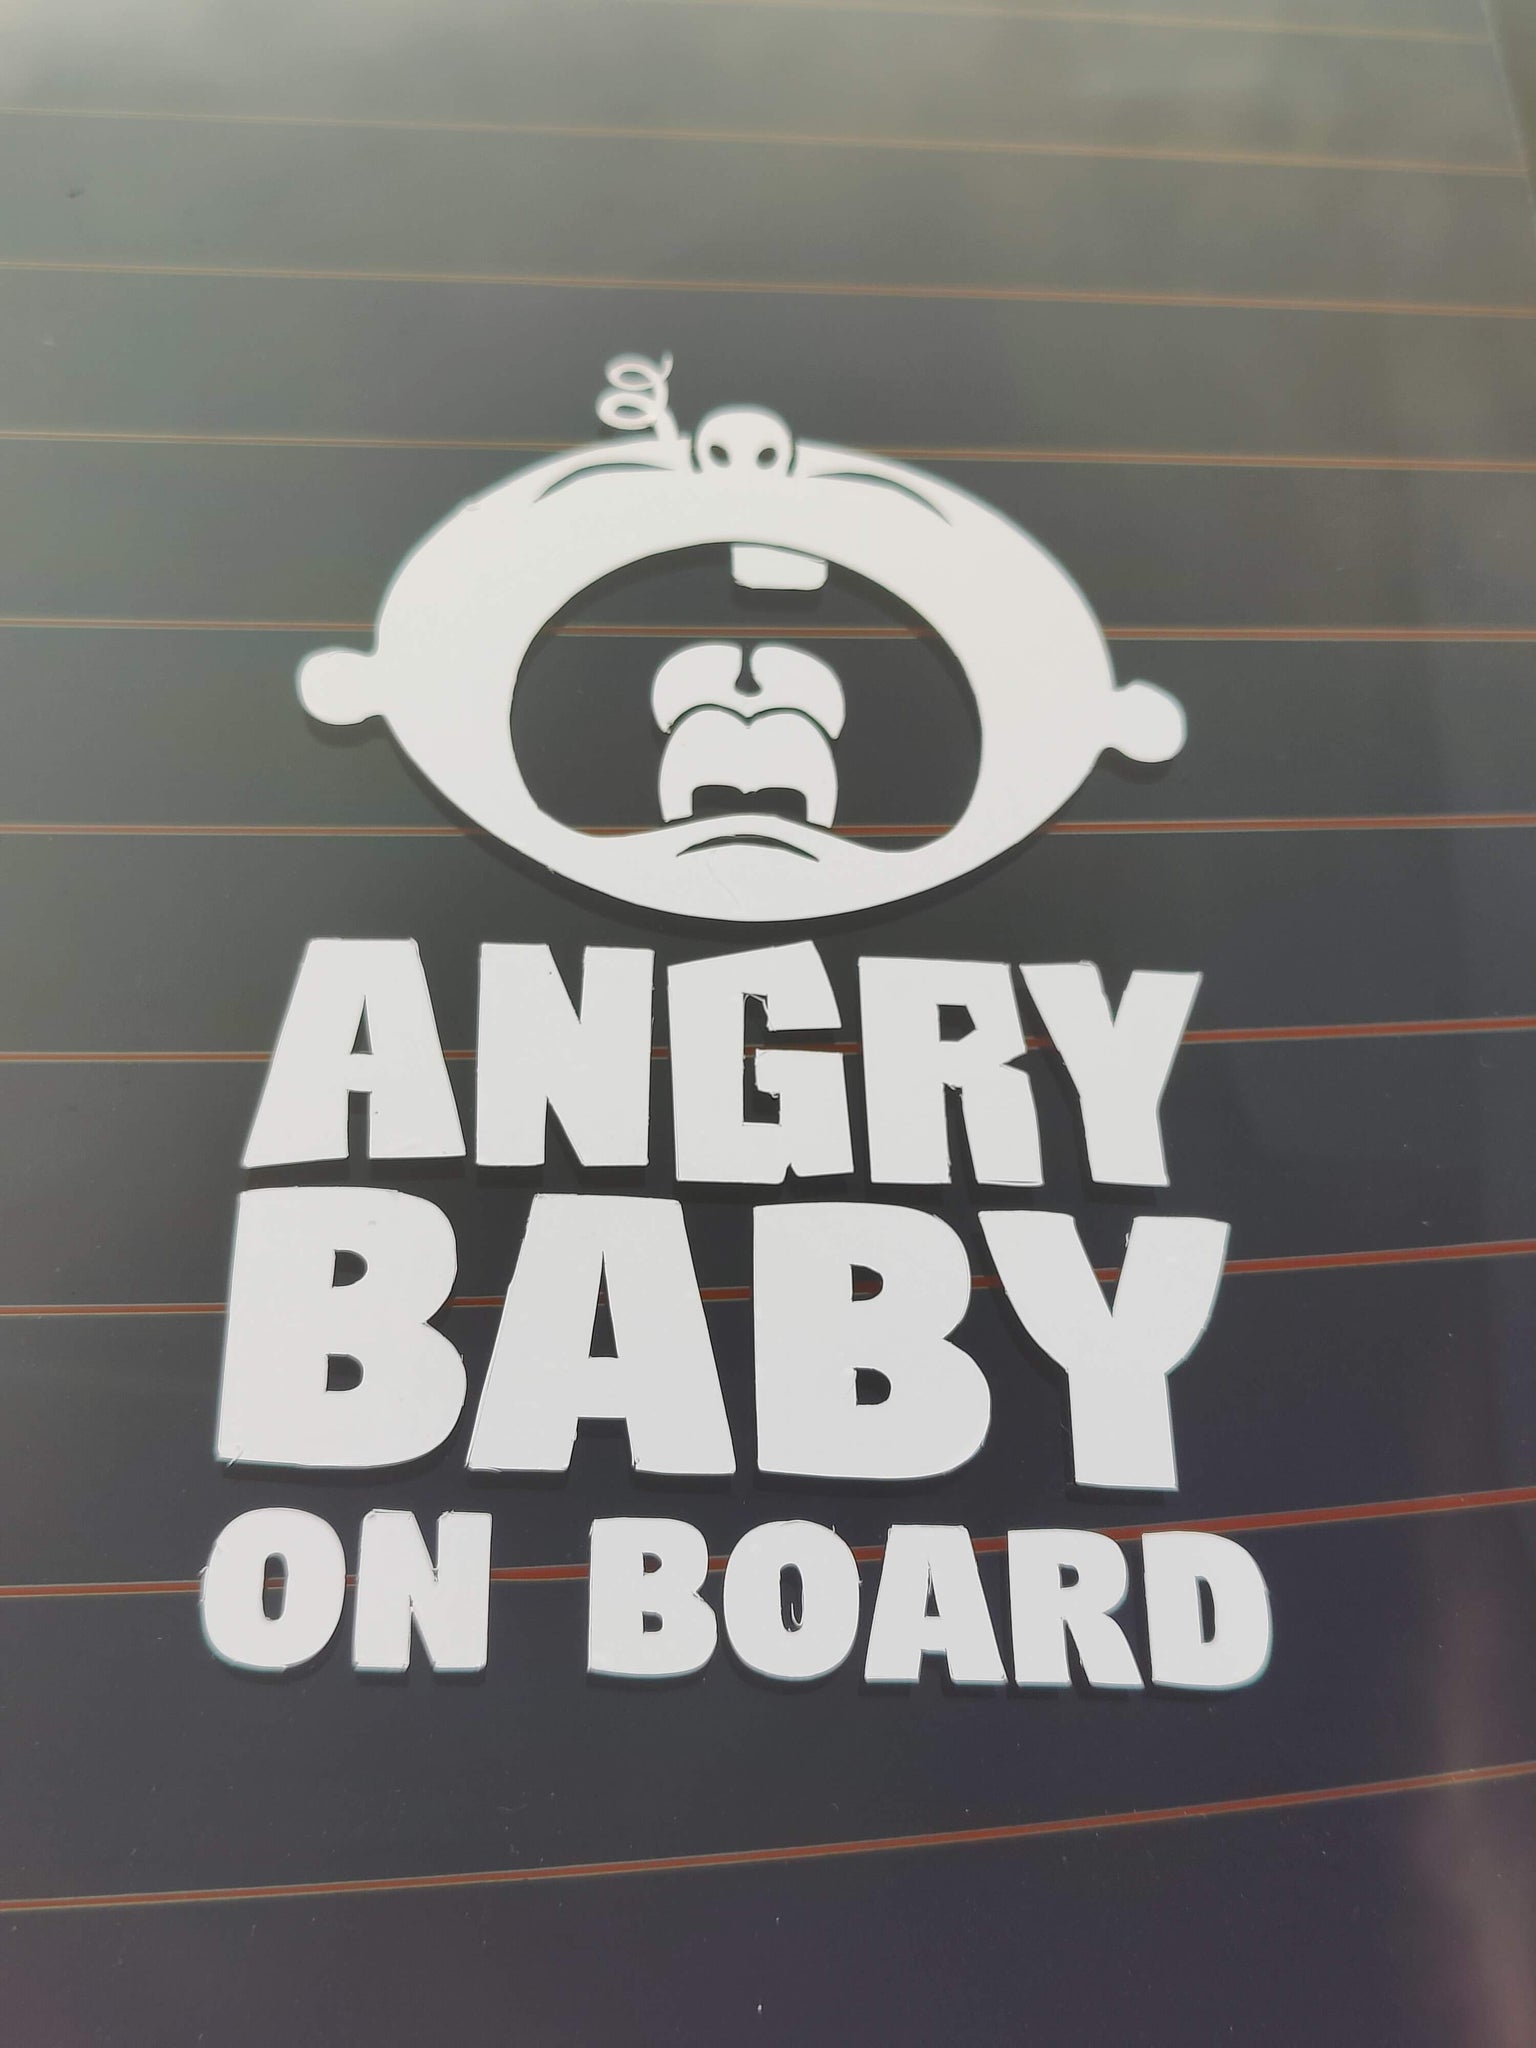 "Angry Baby on Board" Decals: For Those Feisty Little Ones!